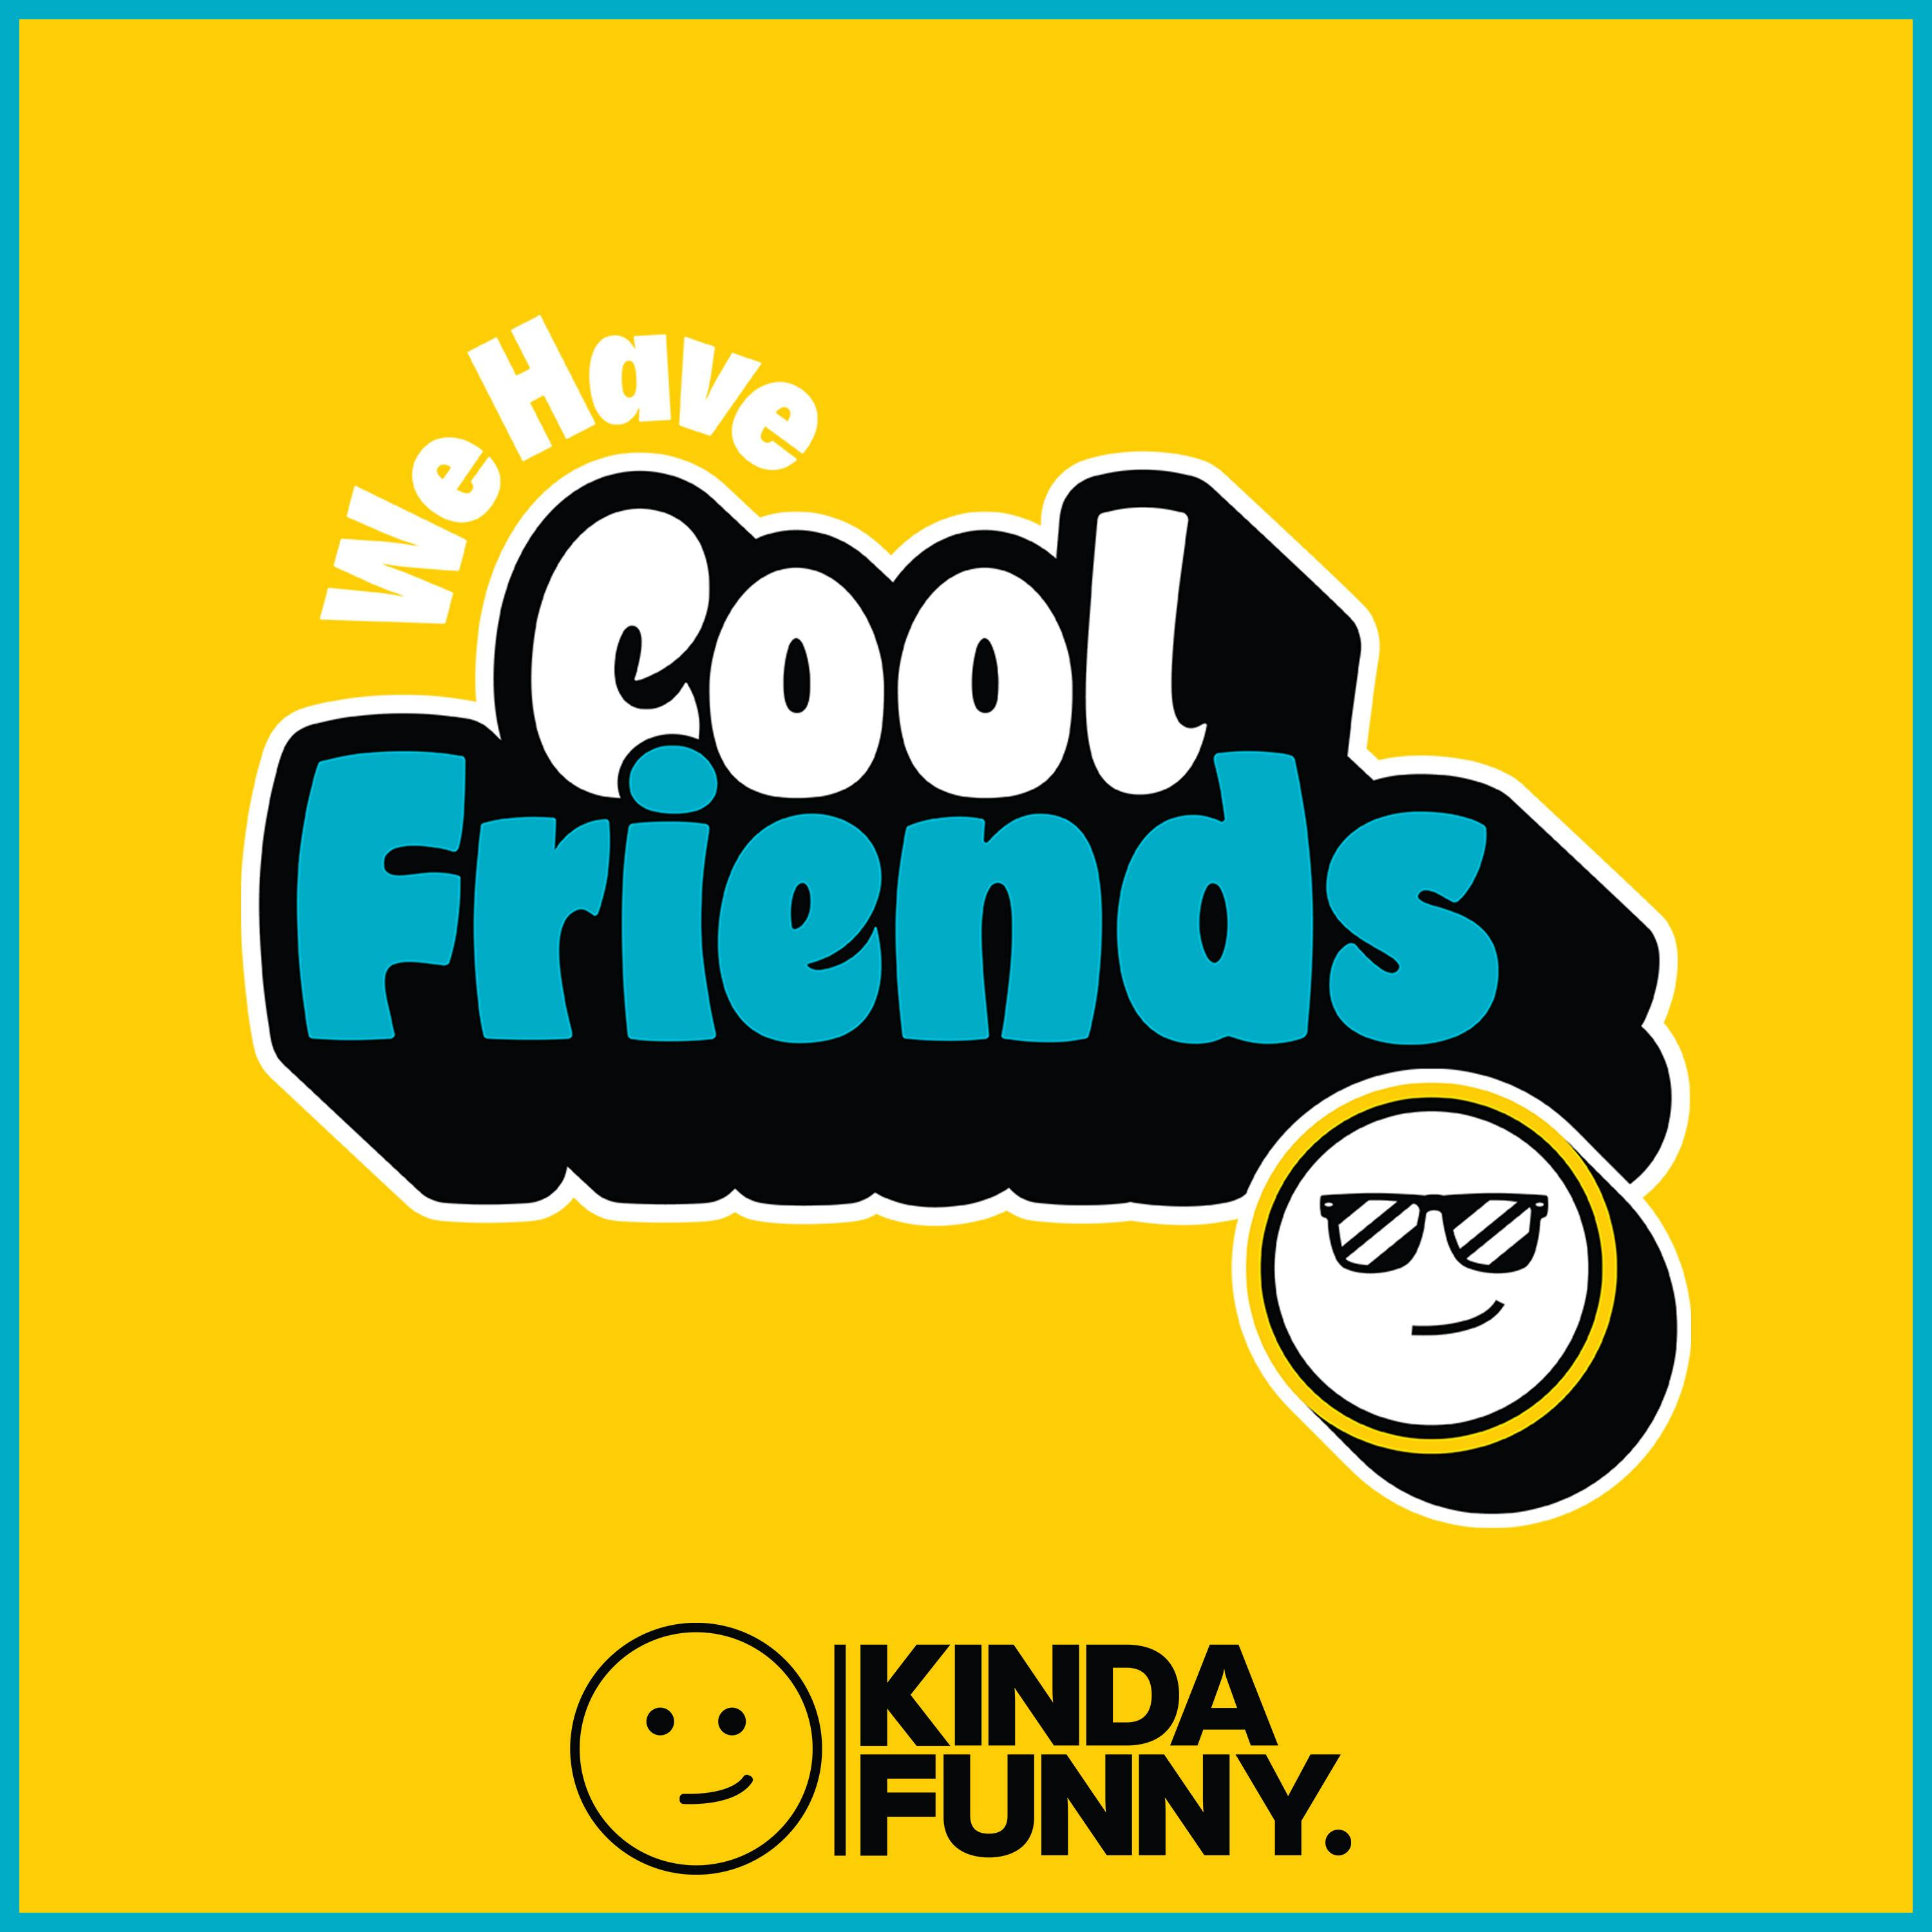 We Have Cool Friends - A Kinda Funny Interview Show